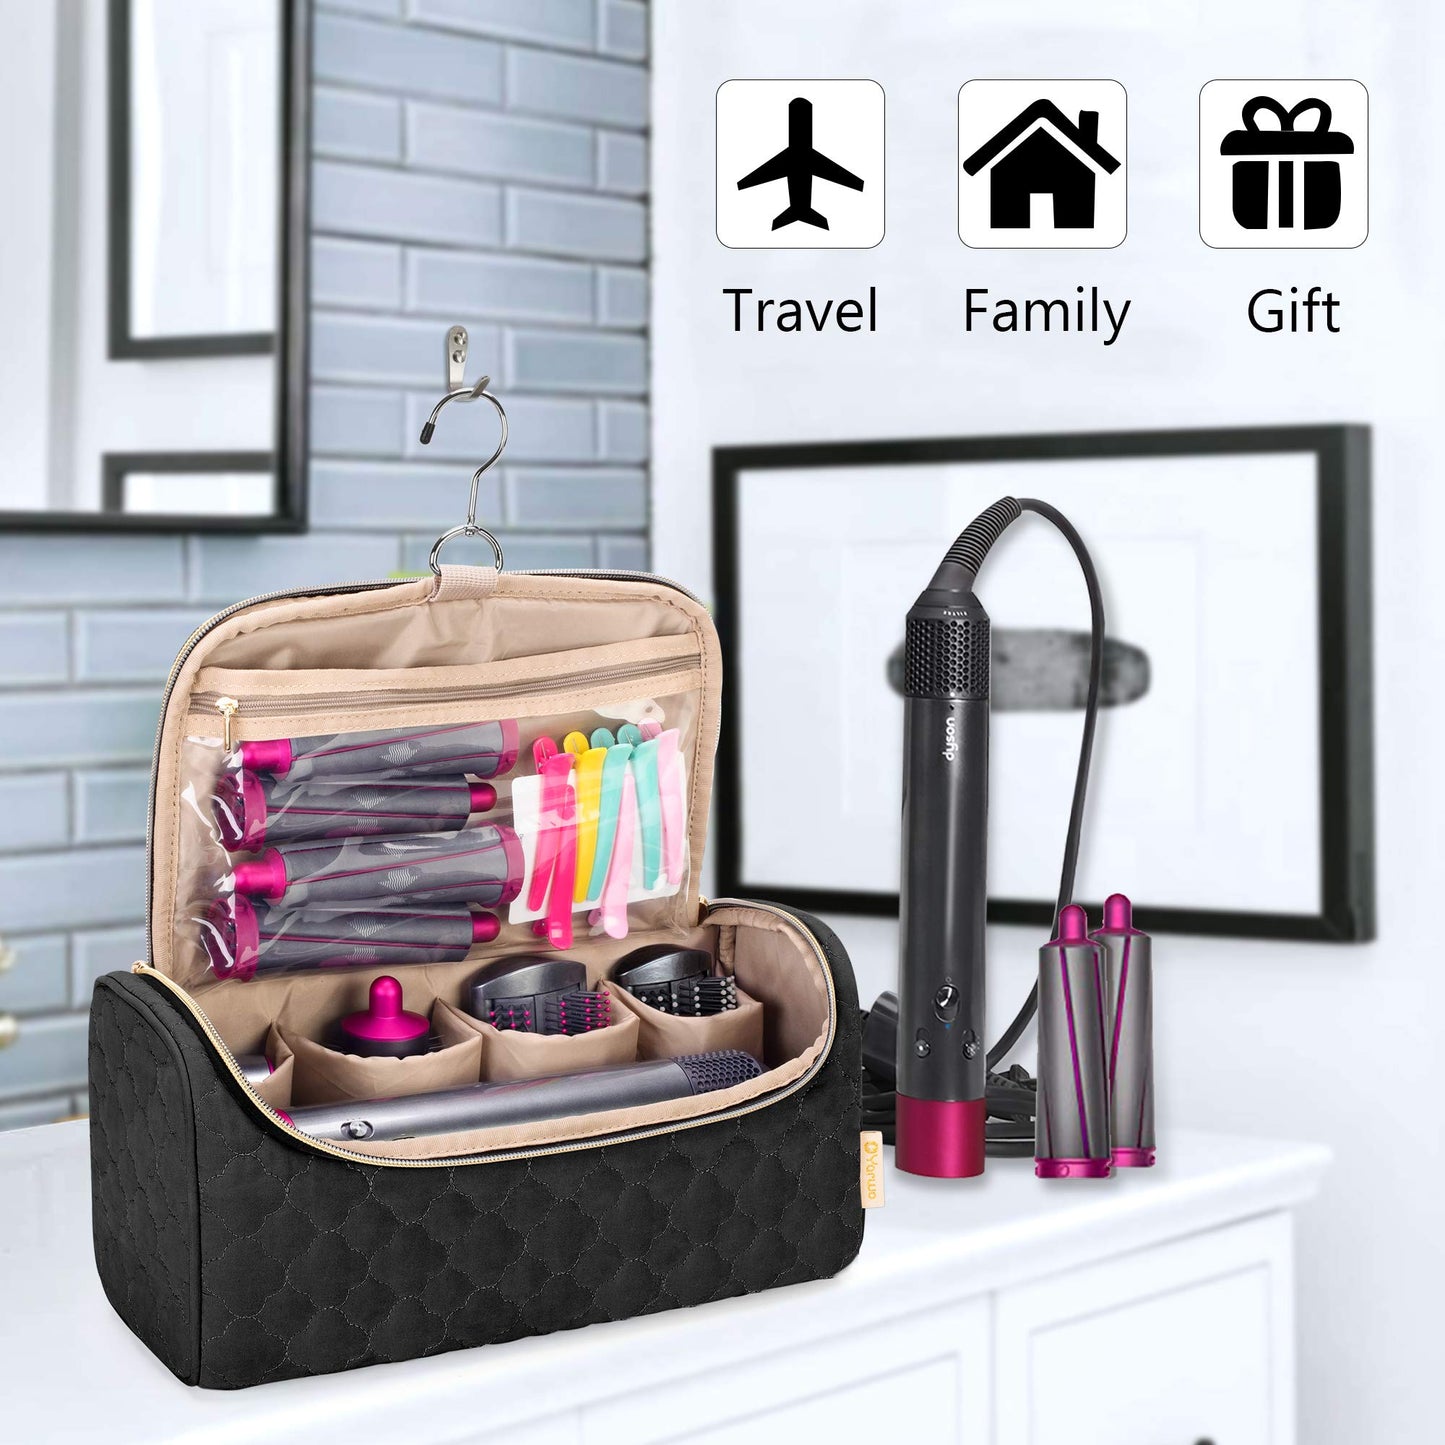 Yarwo Travel Case Compatible for Dyson Airwrap Complete Styler and Attachments, Portable Storage Bag with Hanging Hook for Hair Curler Accessories, Valentines Day Gifts for Her, Black (Patent Design)